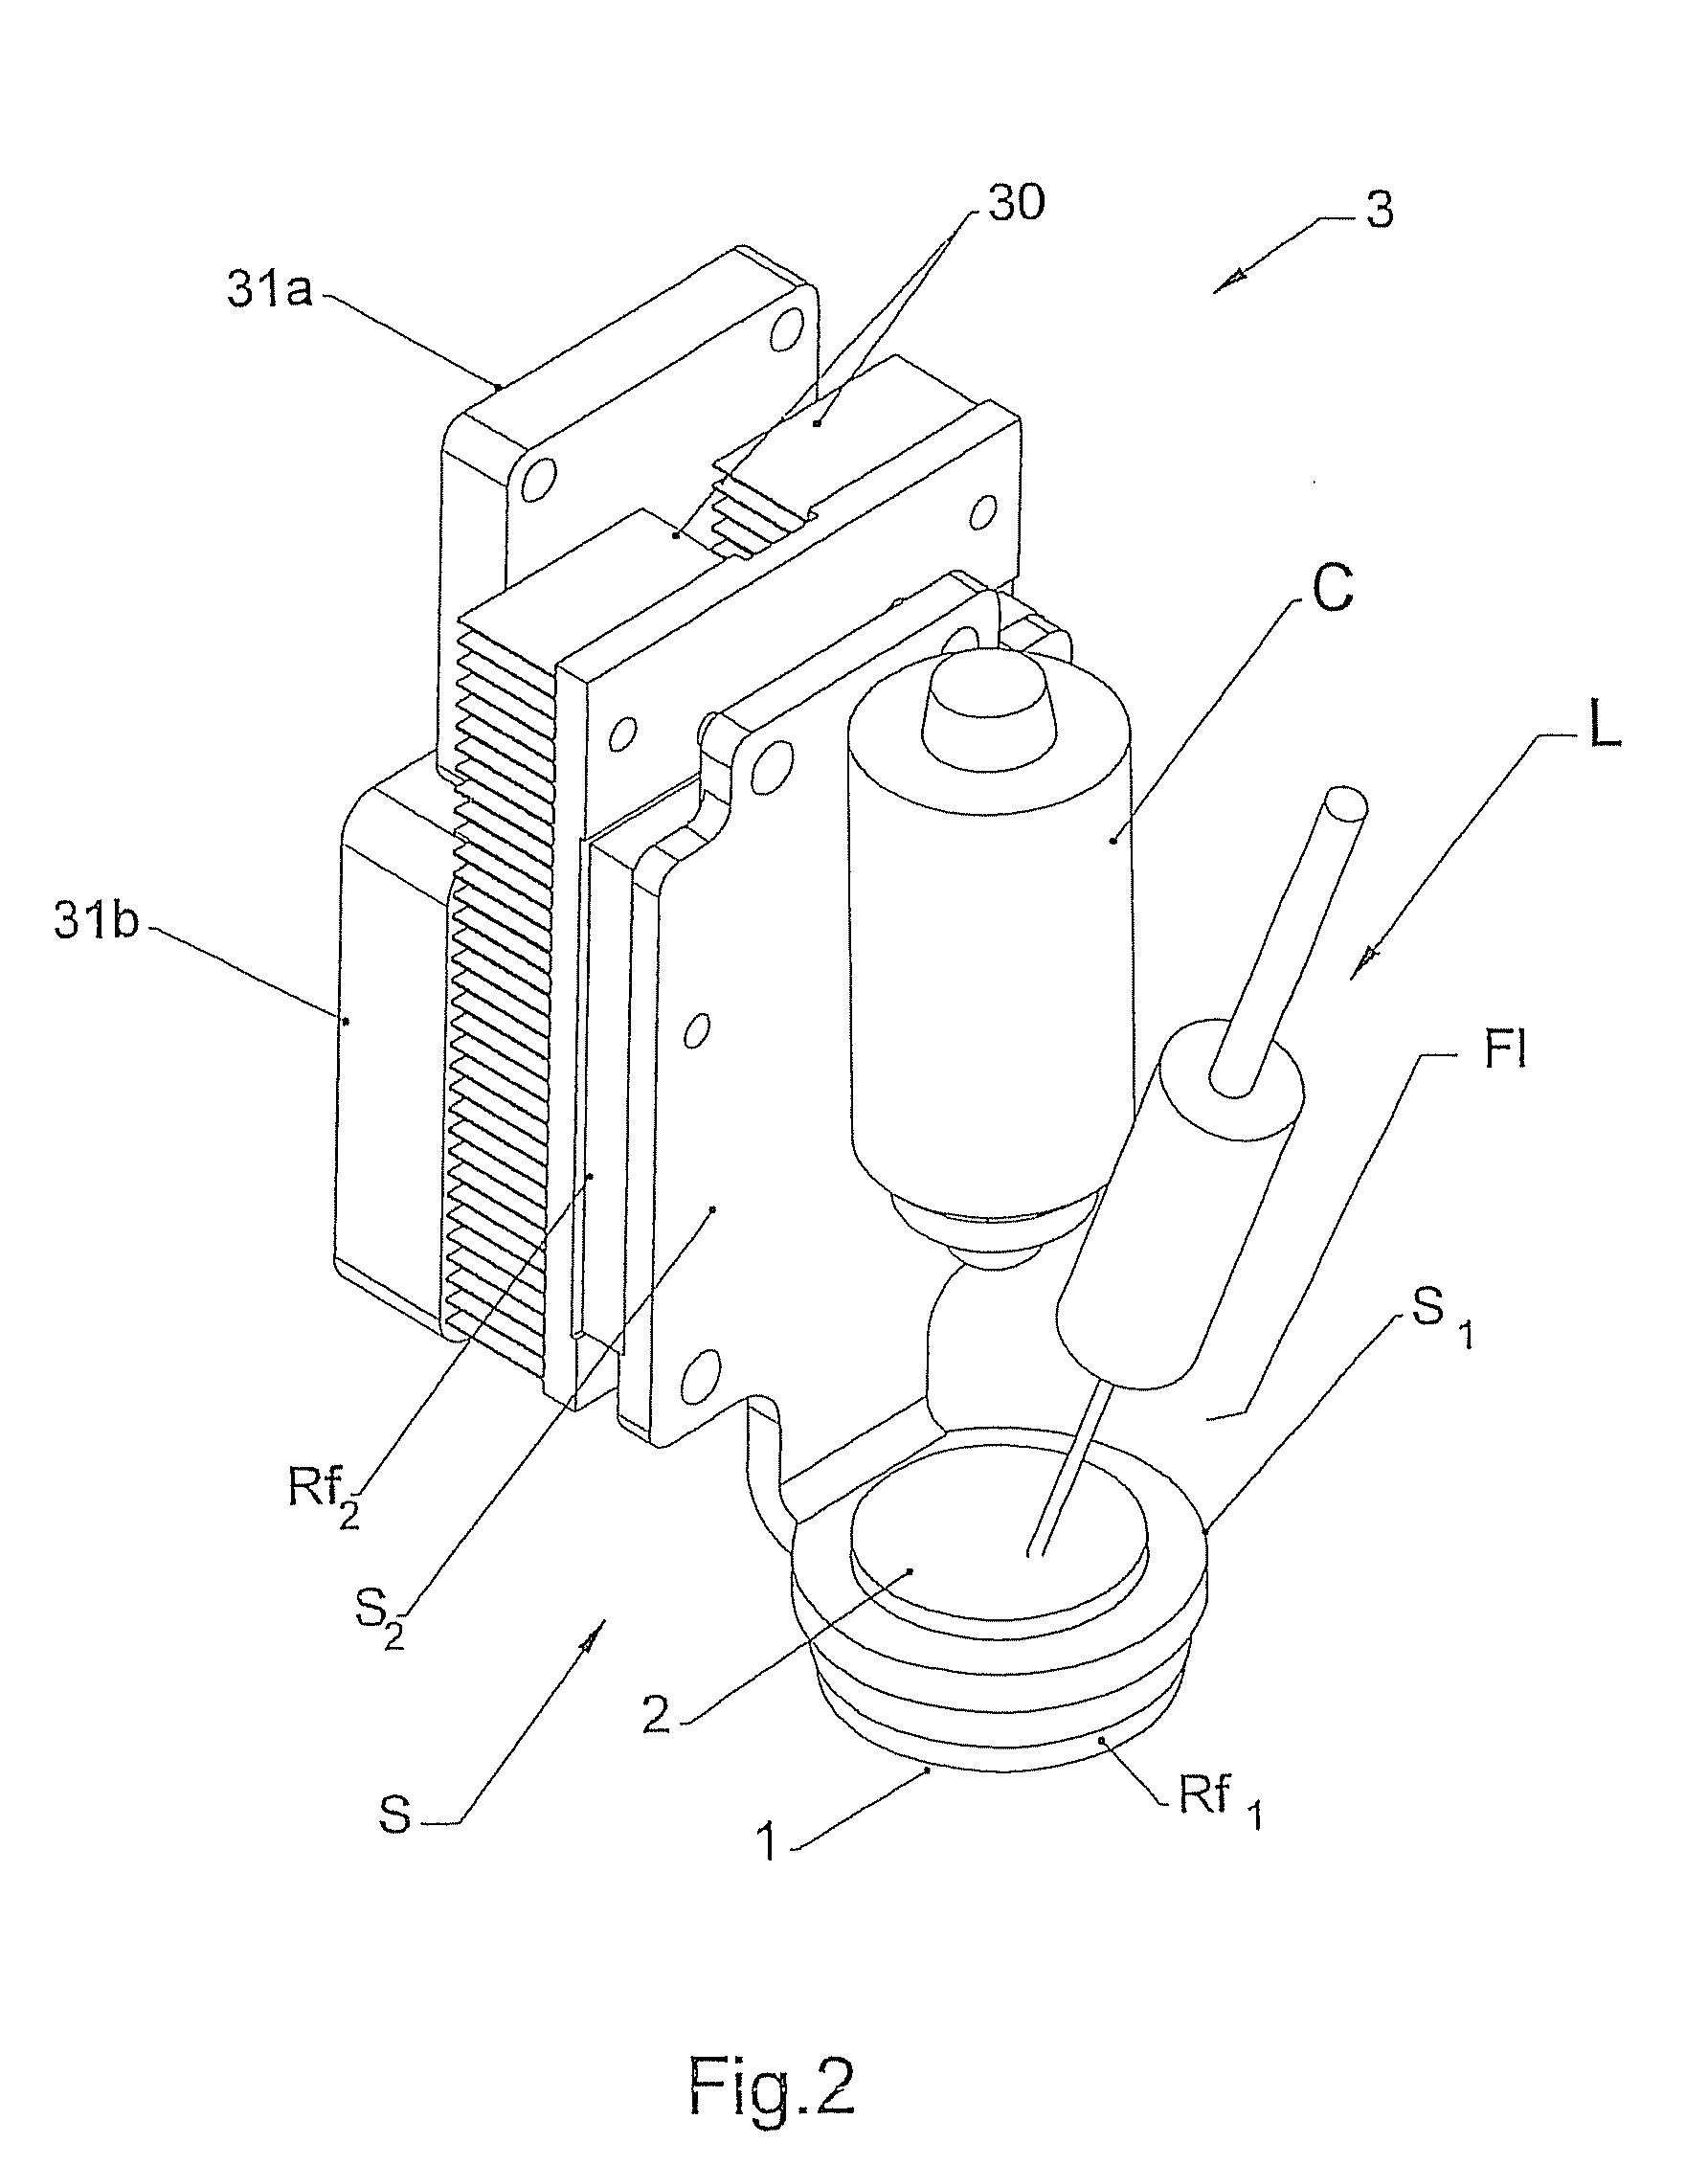 Cooled handpiece for treating the skin with visible radiation